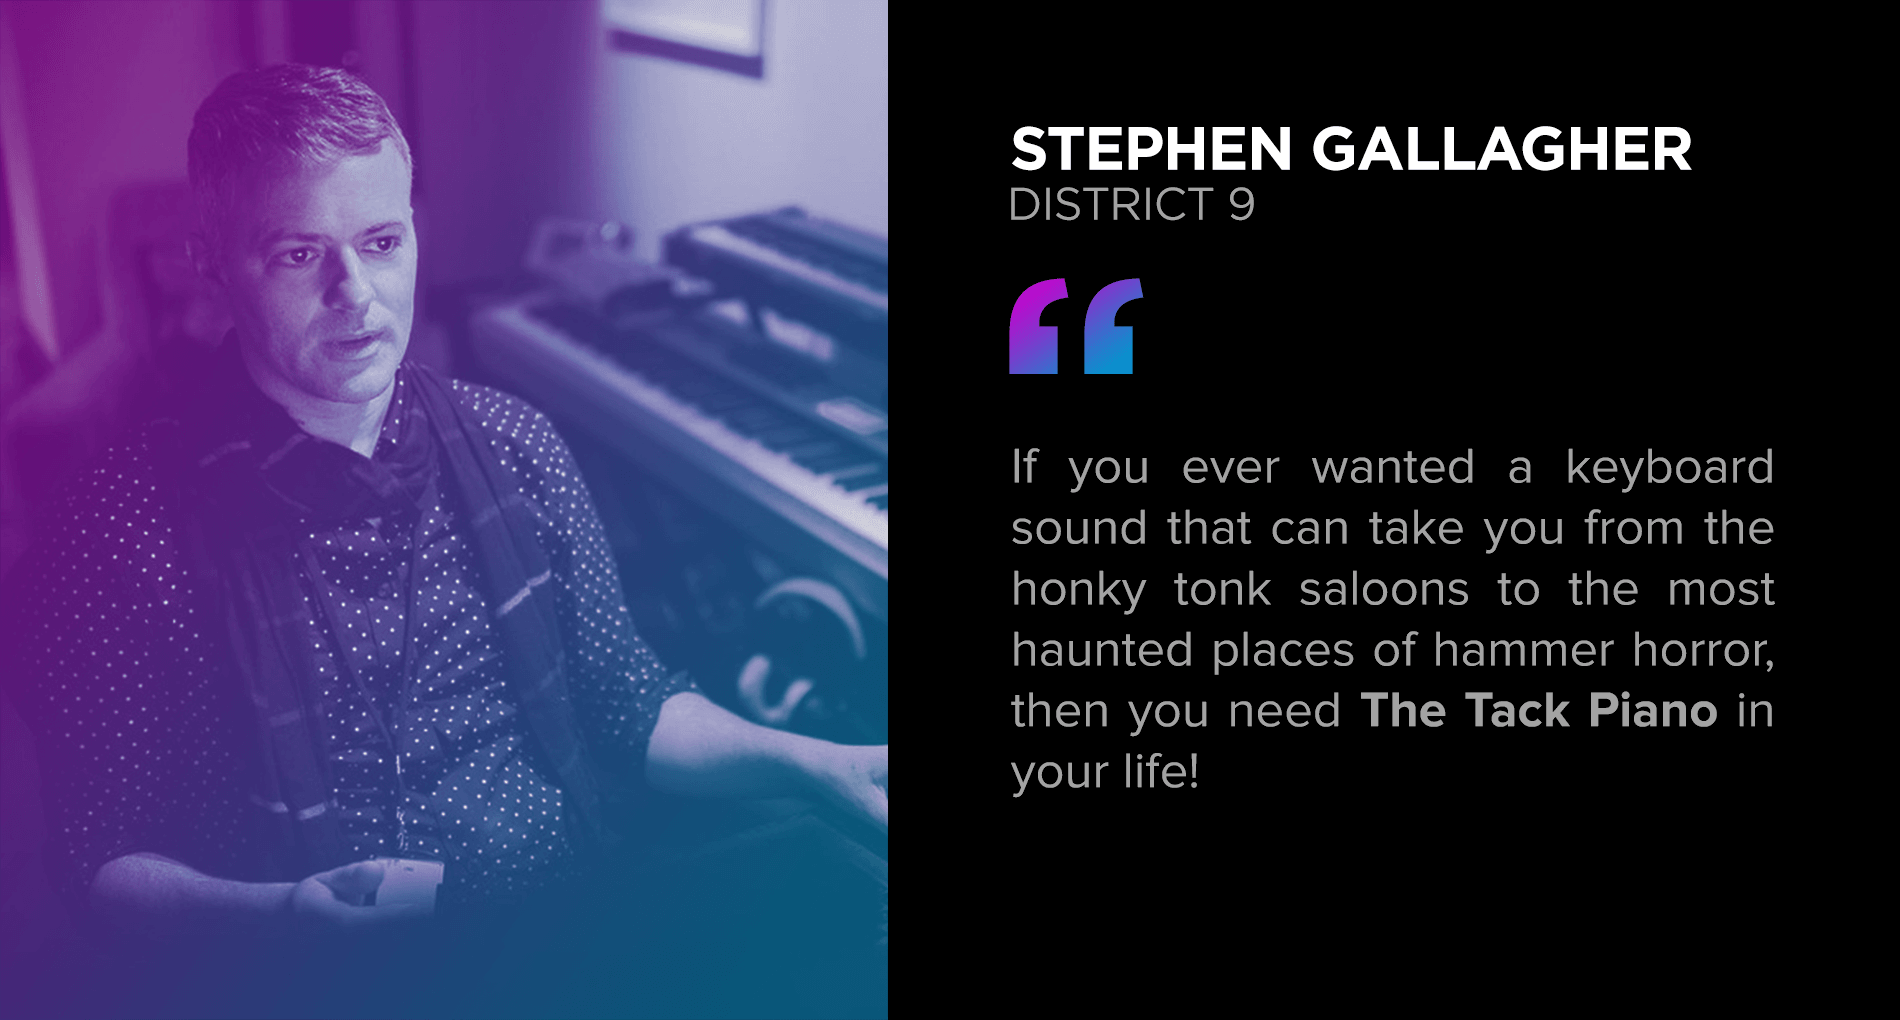 Stephen Gallagher - The Tack Piano